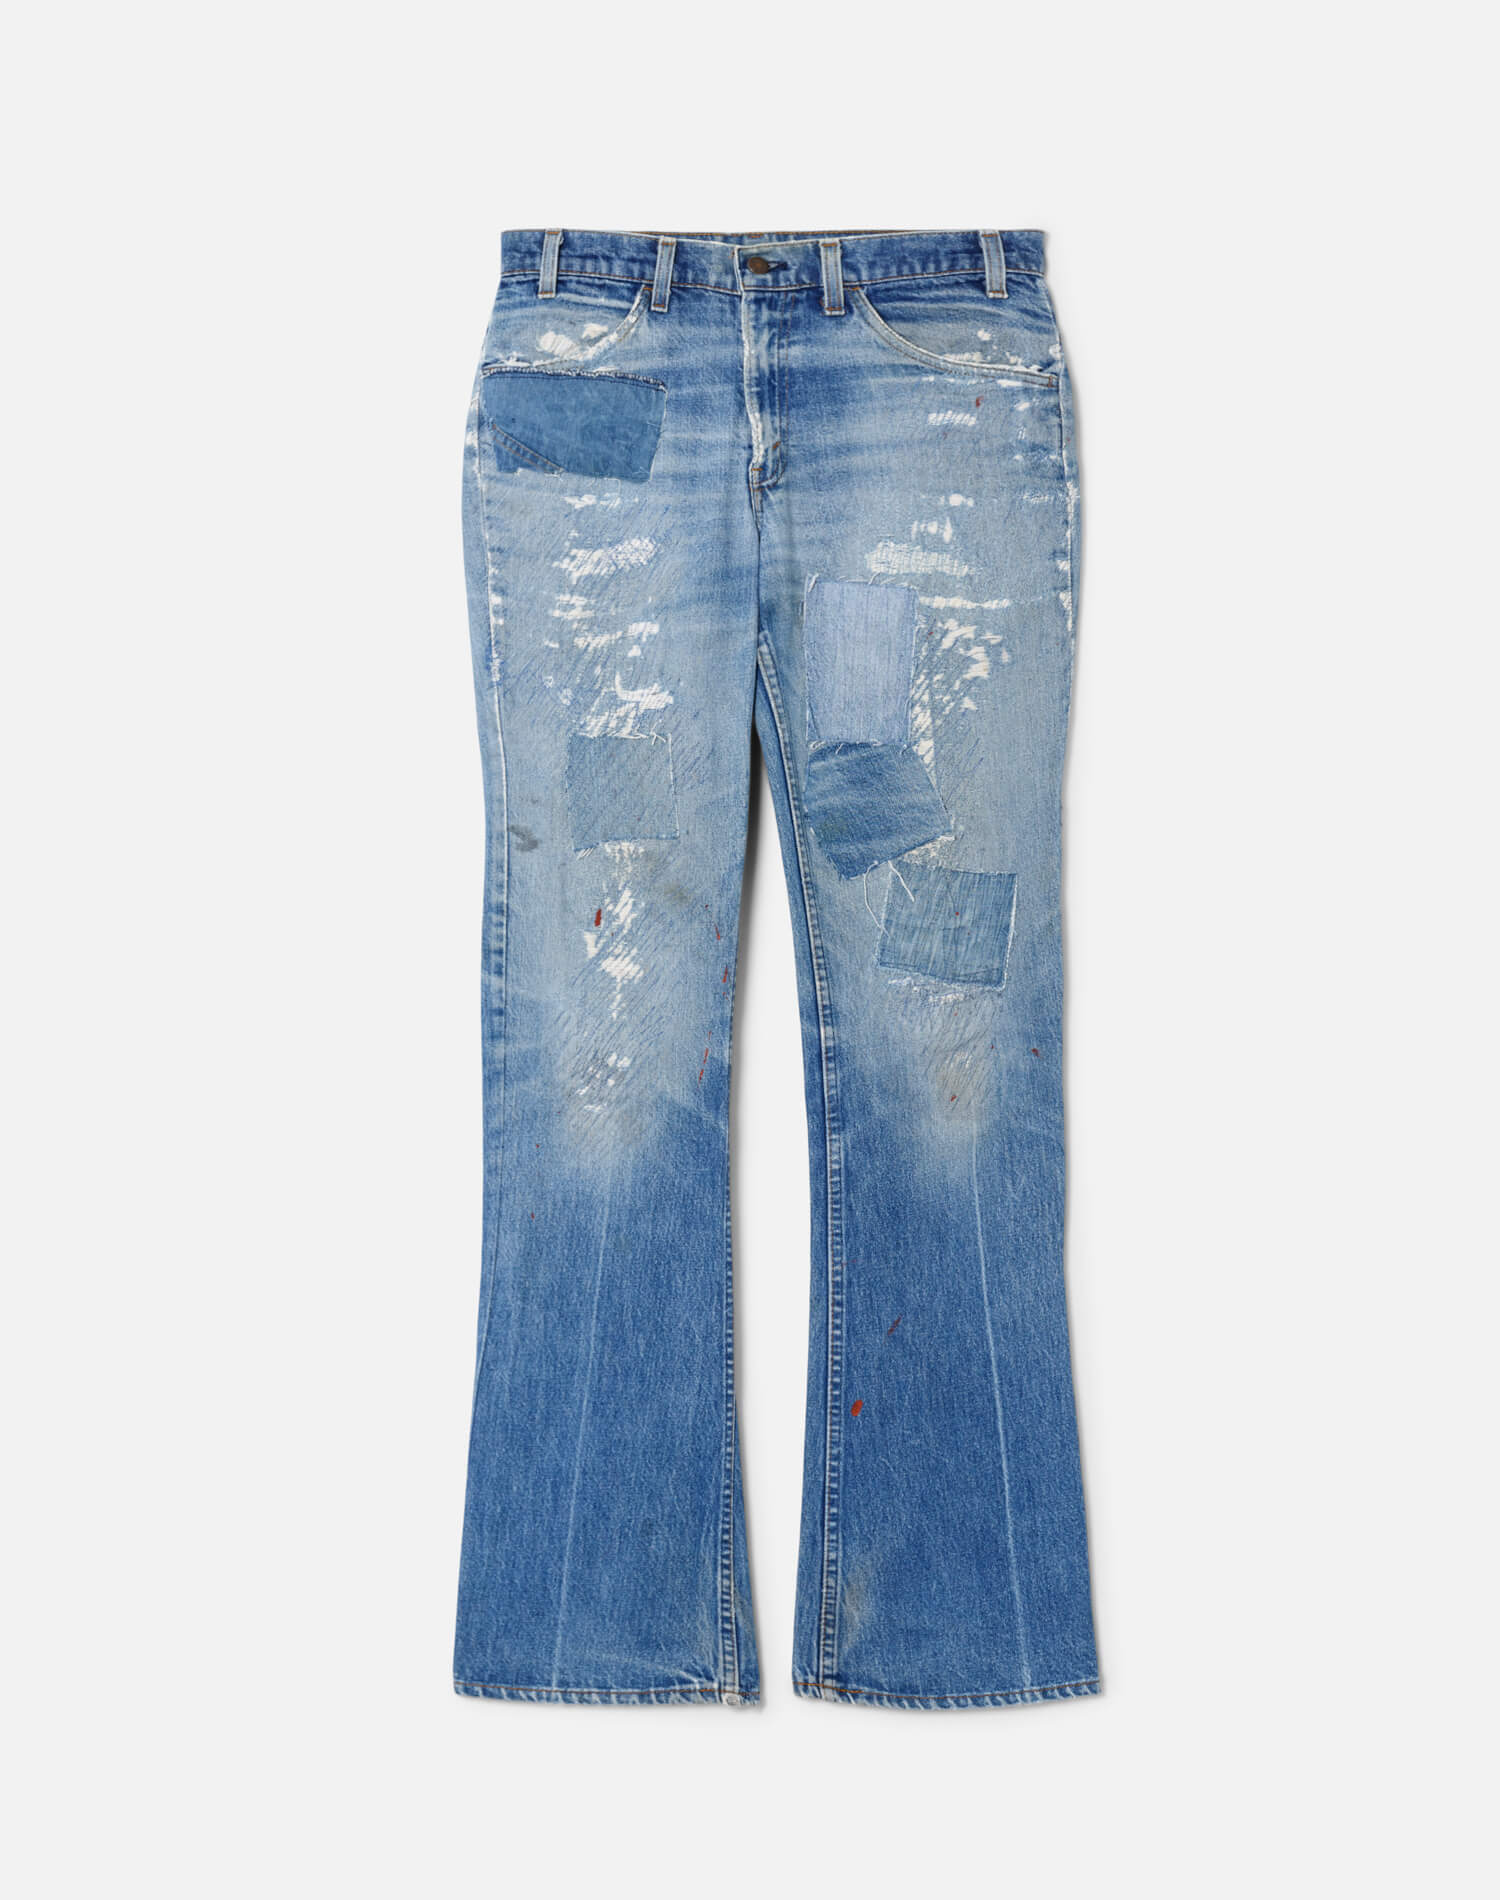 70s Repaired Distressed Levi's 517